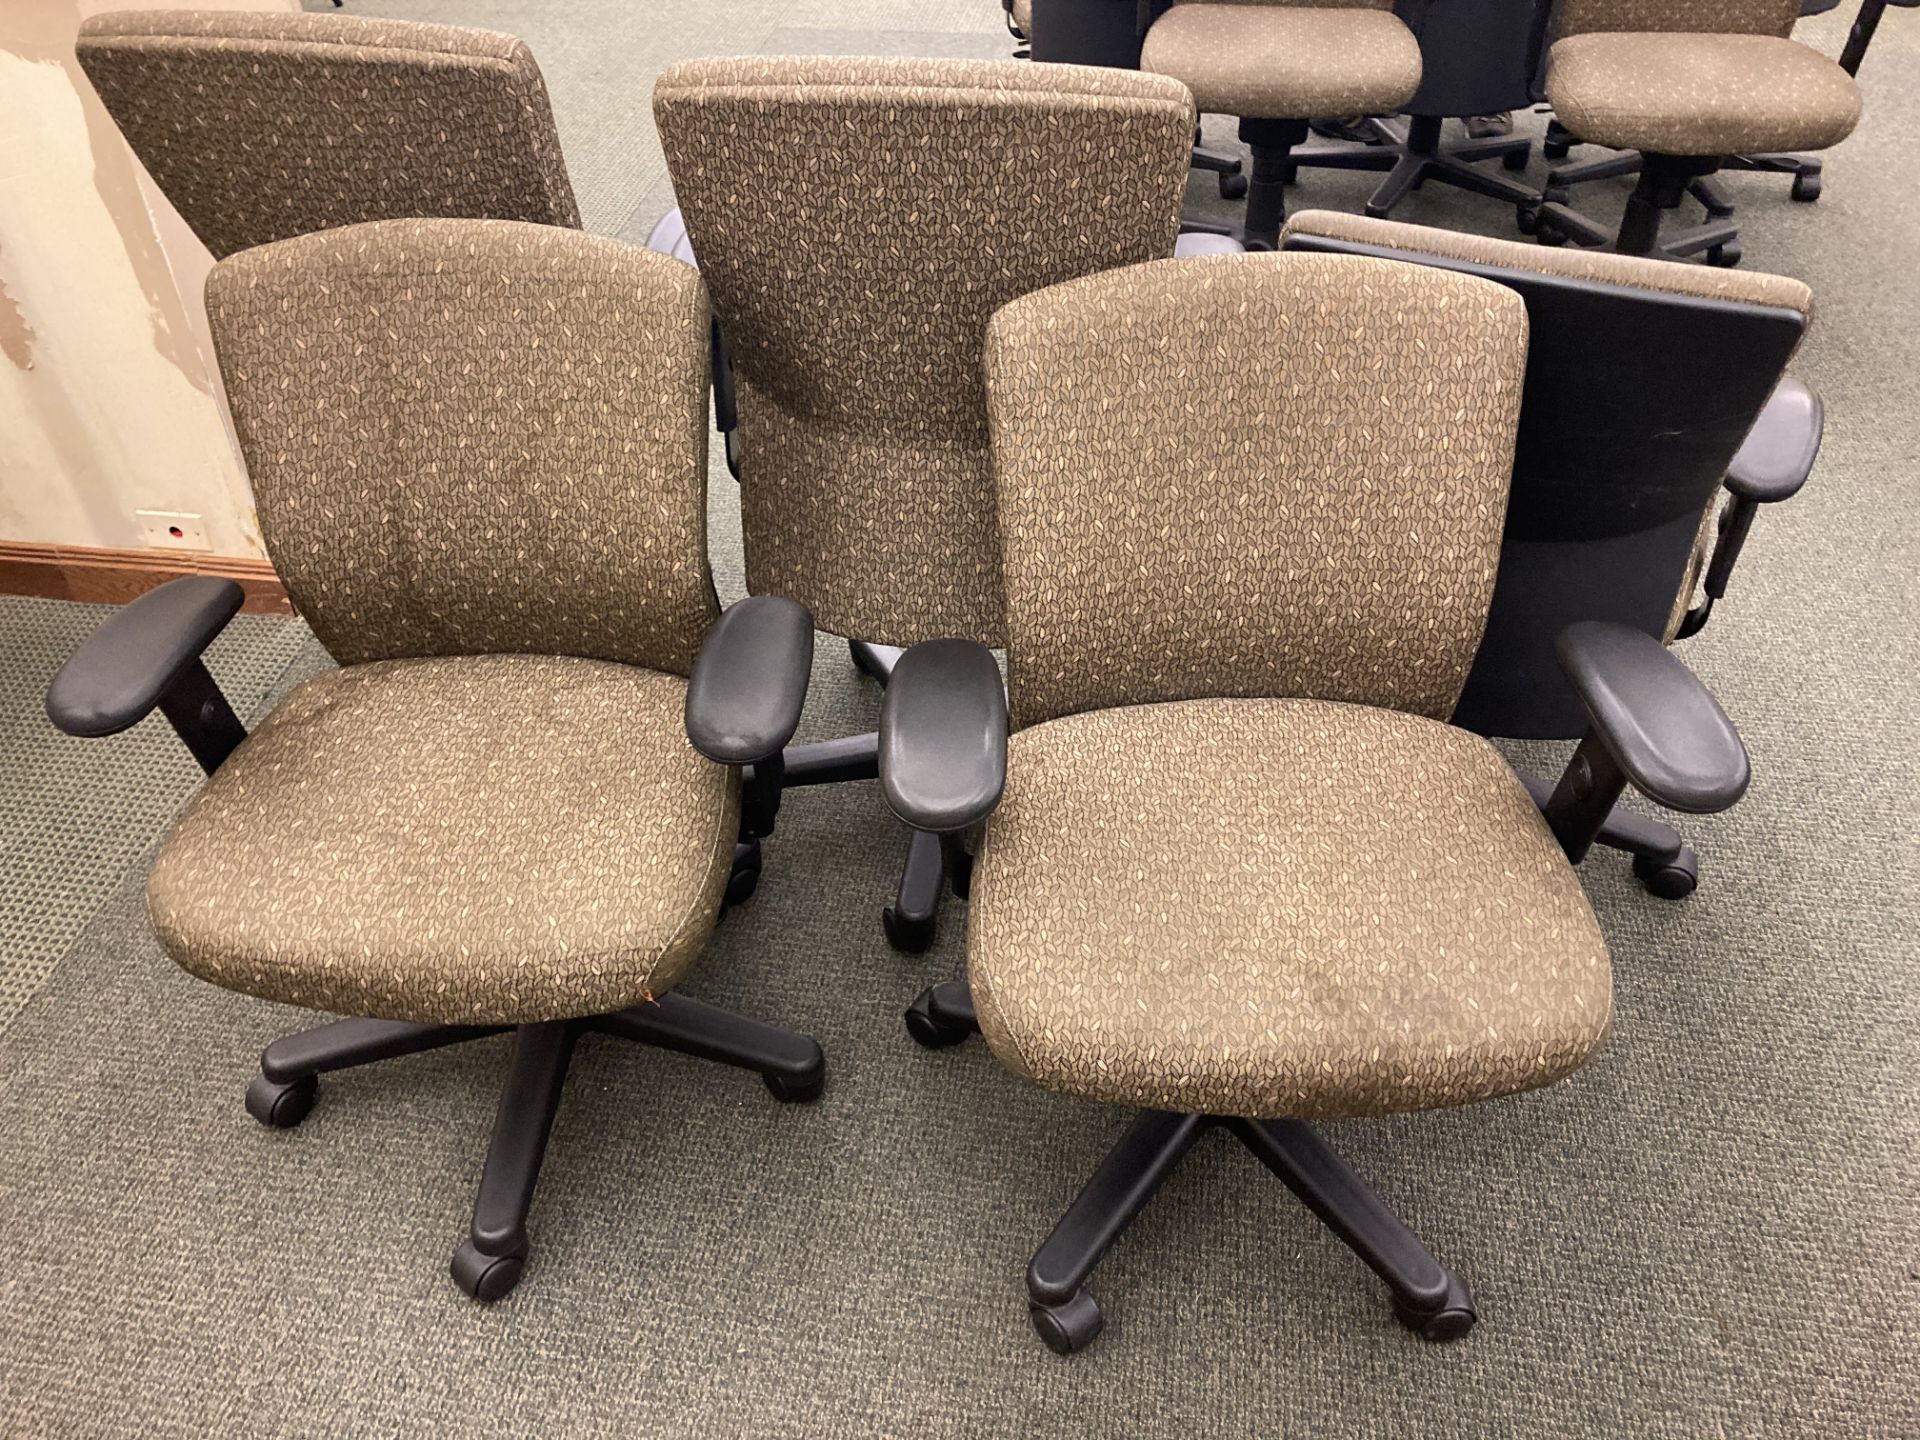 5 office chairs - Image 2 of 2